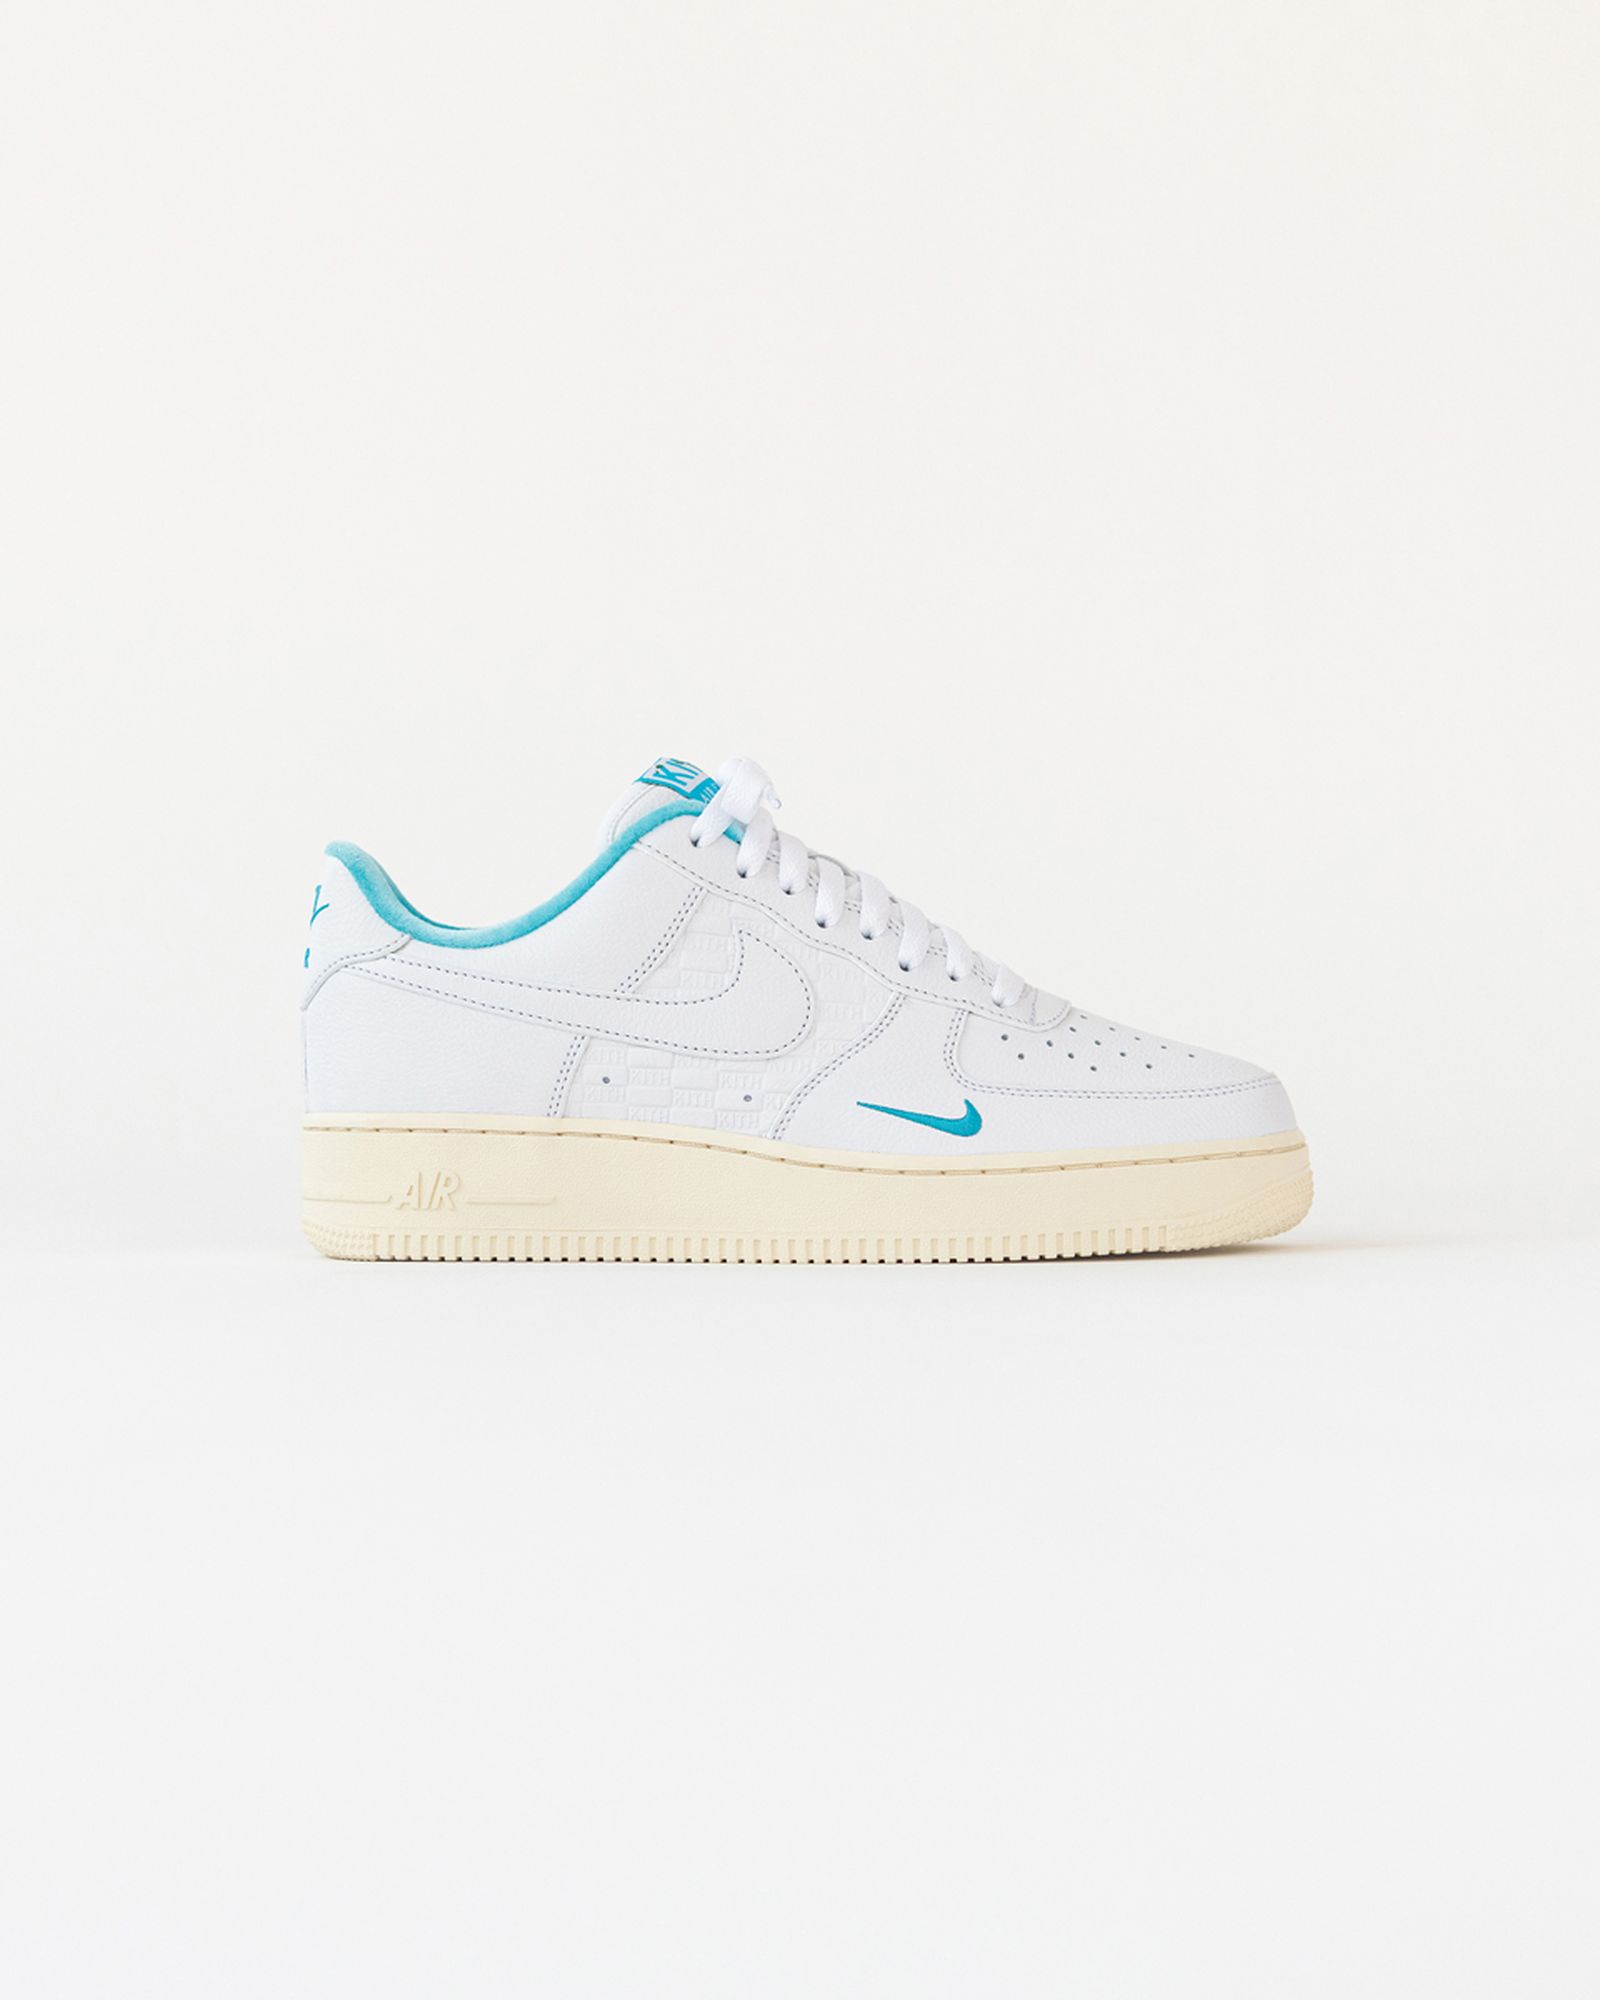 kith nike air force 1 hawaii collaboration exclusive sneaker release date info price